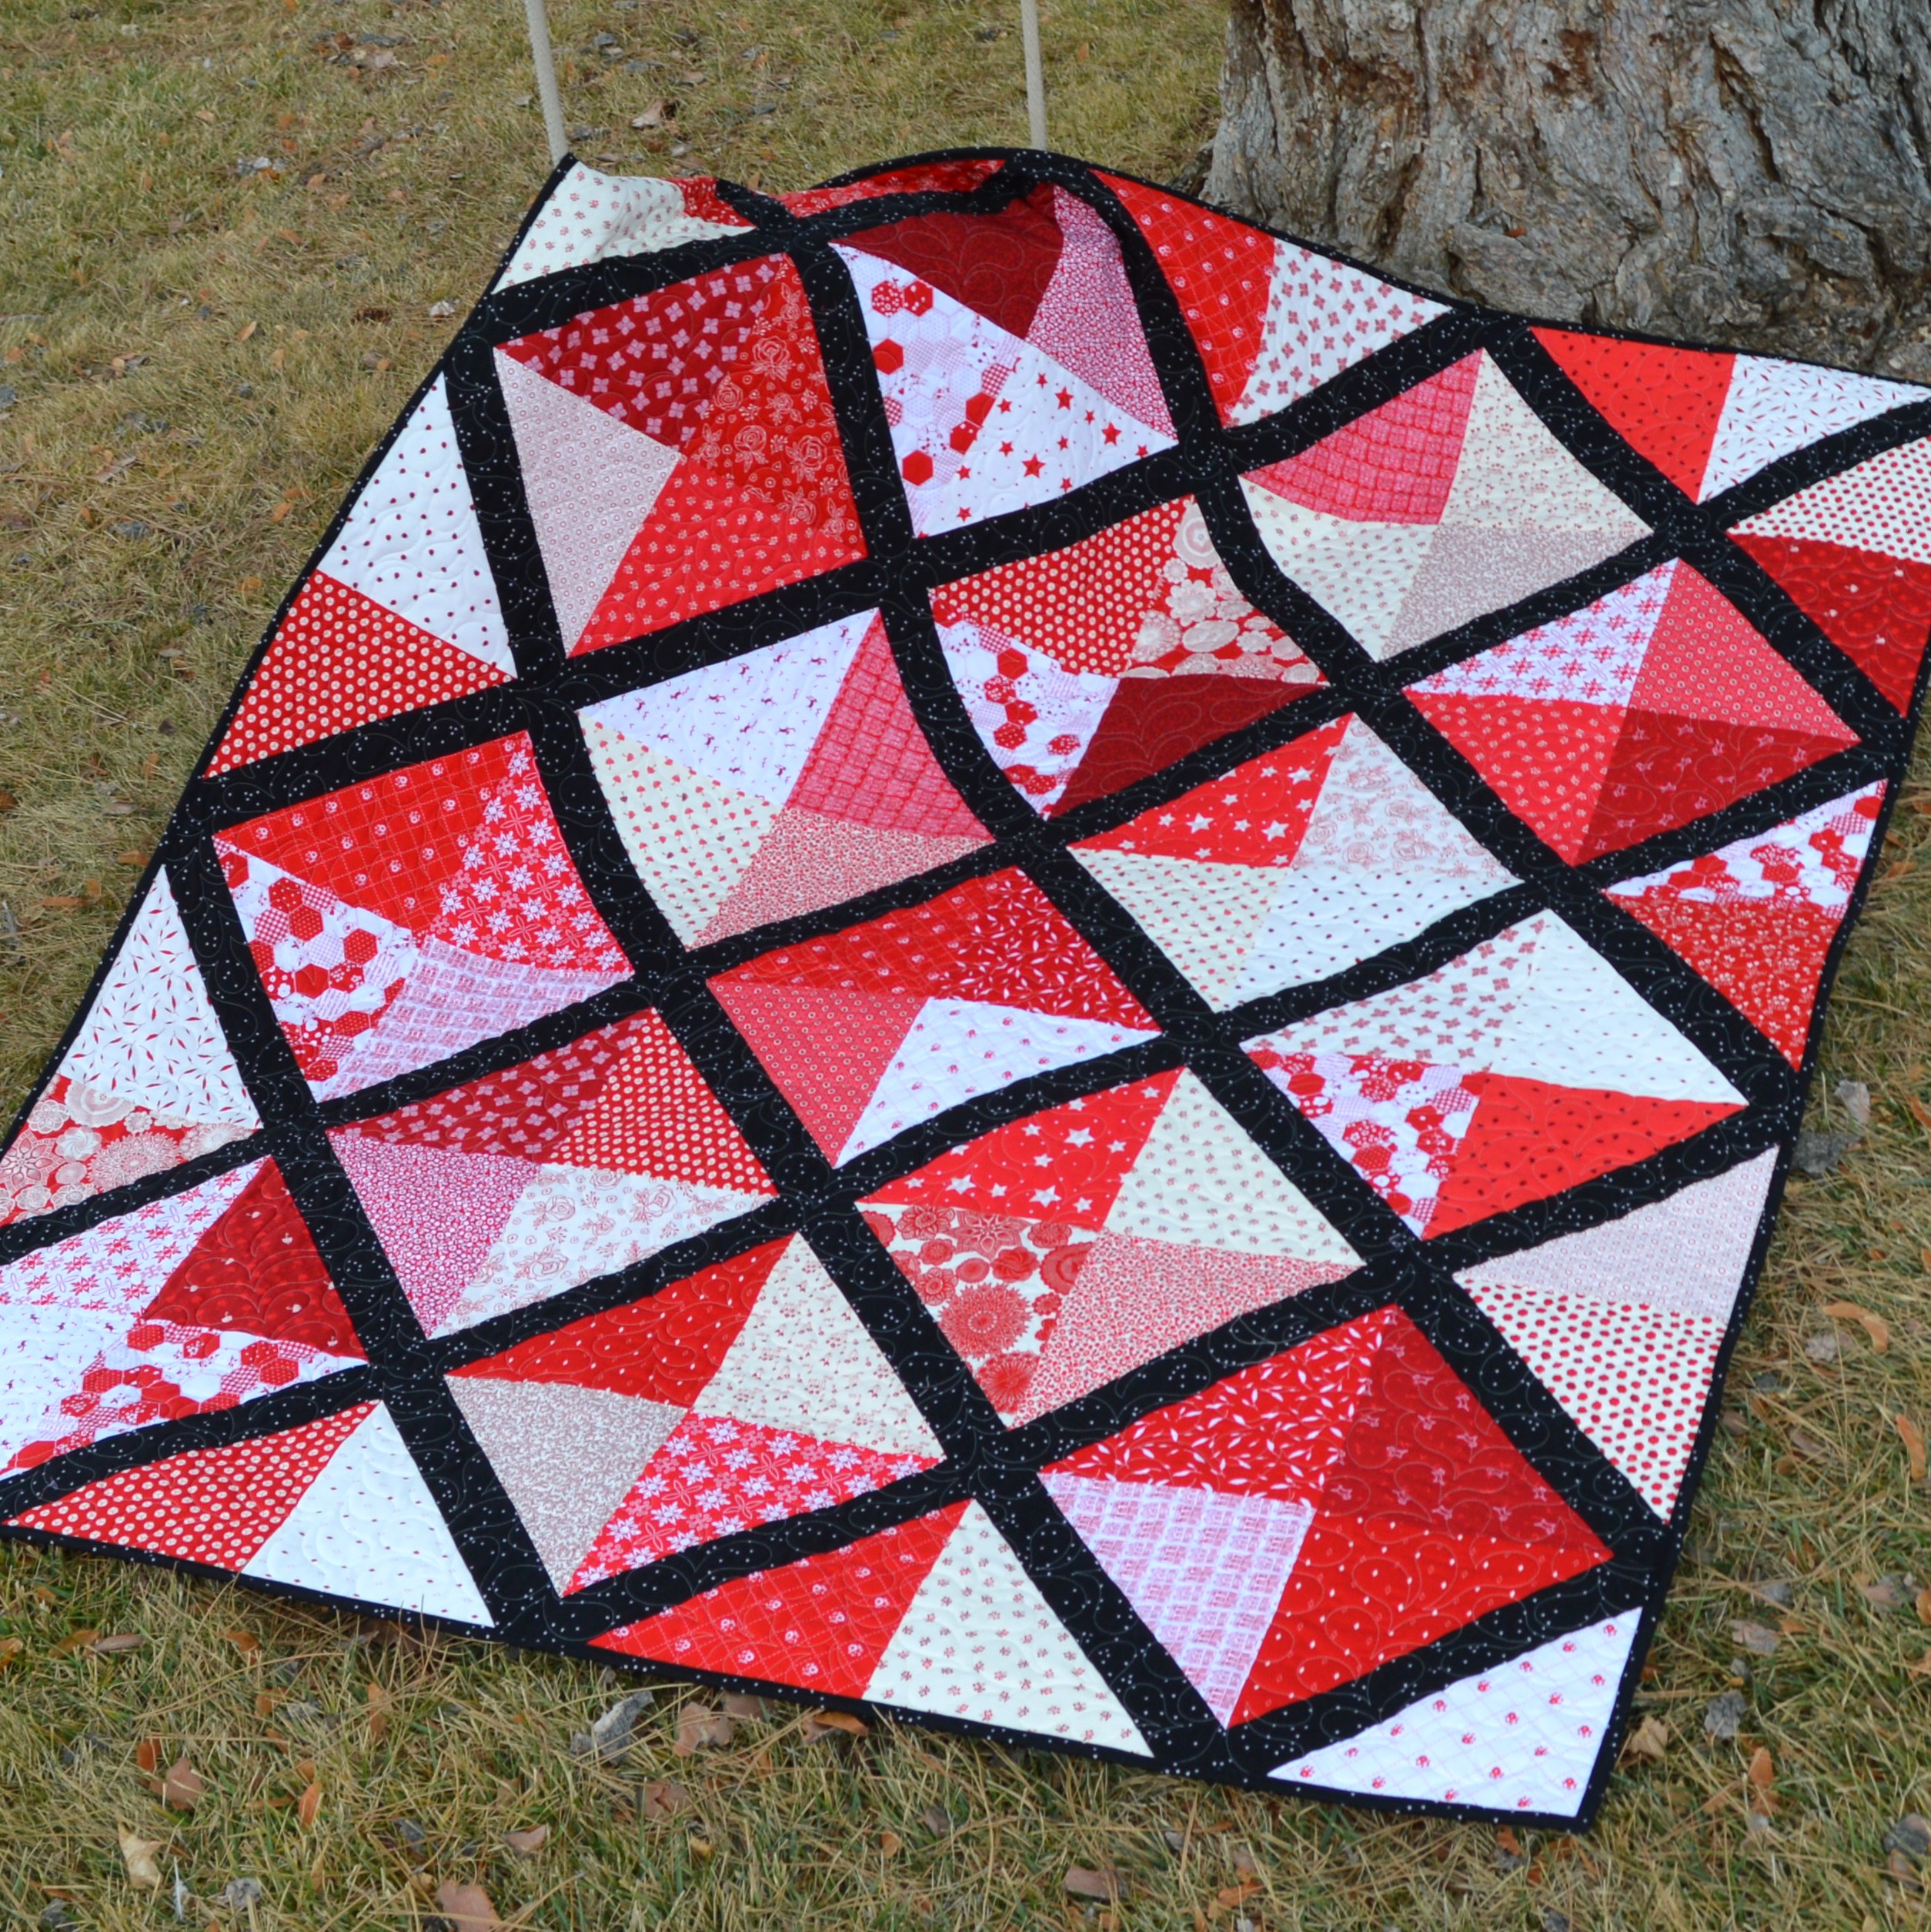 Beginner Quilt Series - How to Sew Quilt Squares Together